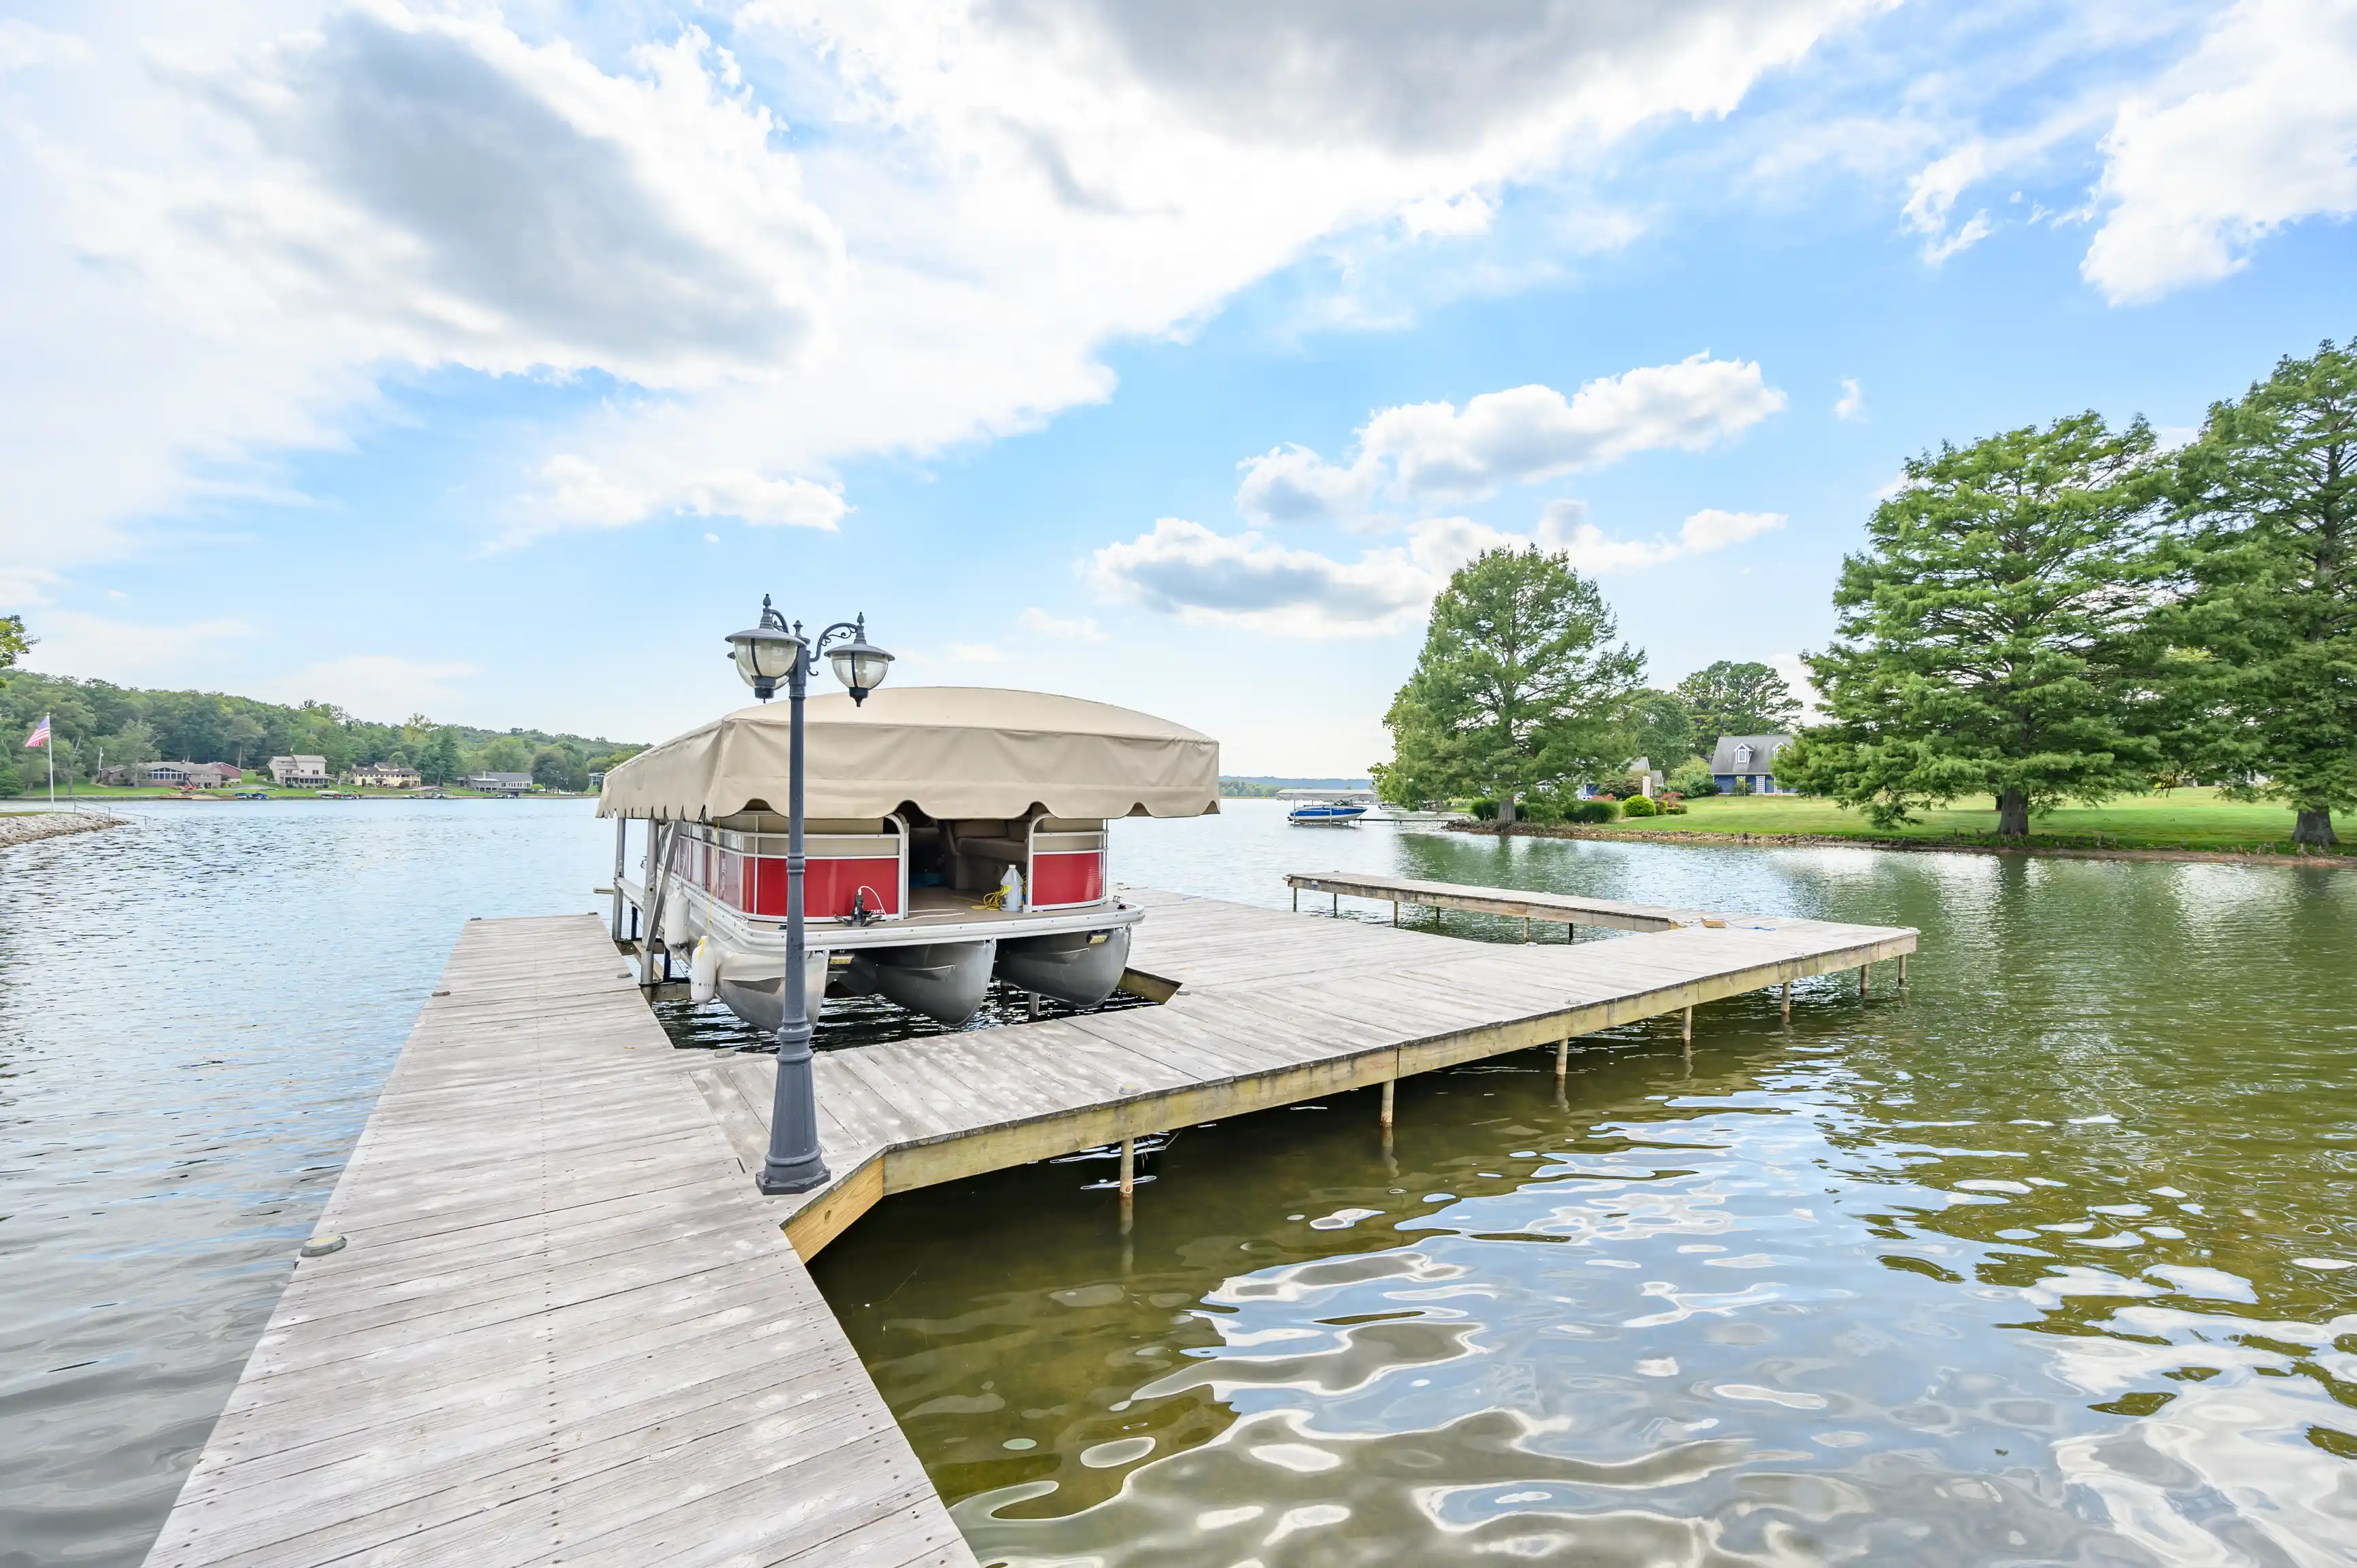 A pontoon boat moored at a wooden dock on a peaceful lake with greenery and a blue sky with clouds.